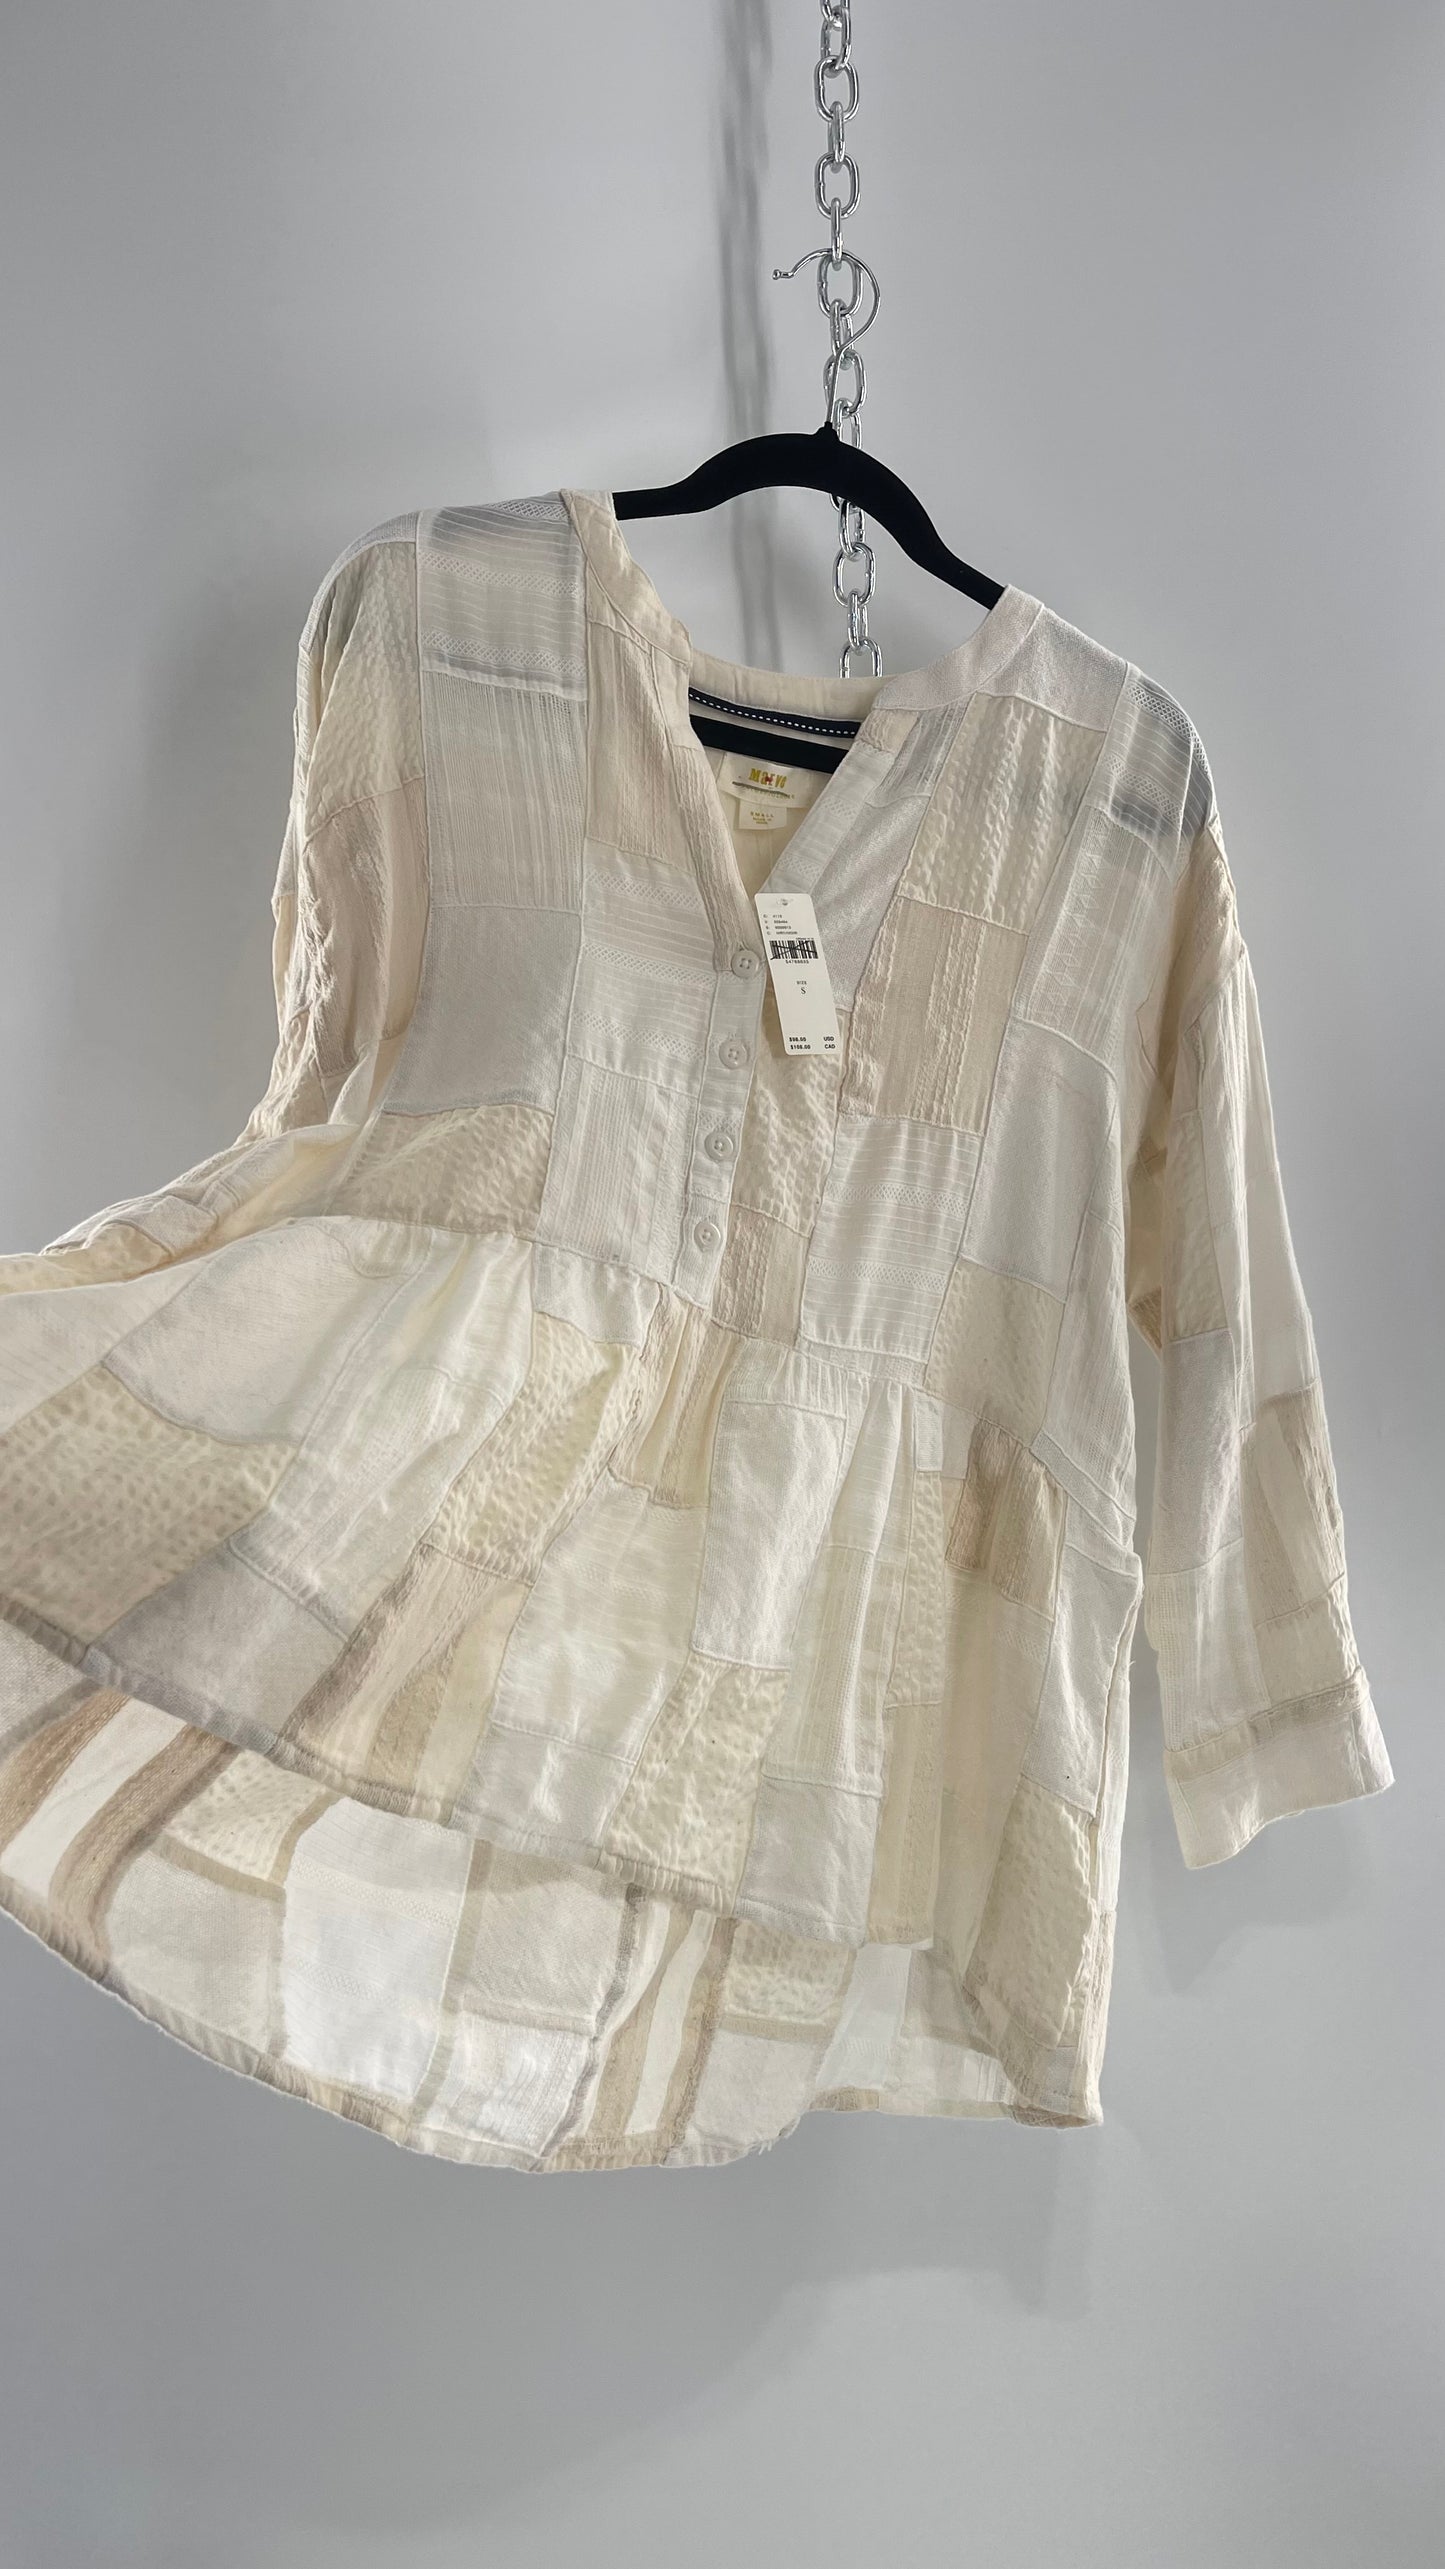 Anthropologie Patchwork Off White Voluminous Blouse with Tags Attached (Small)